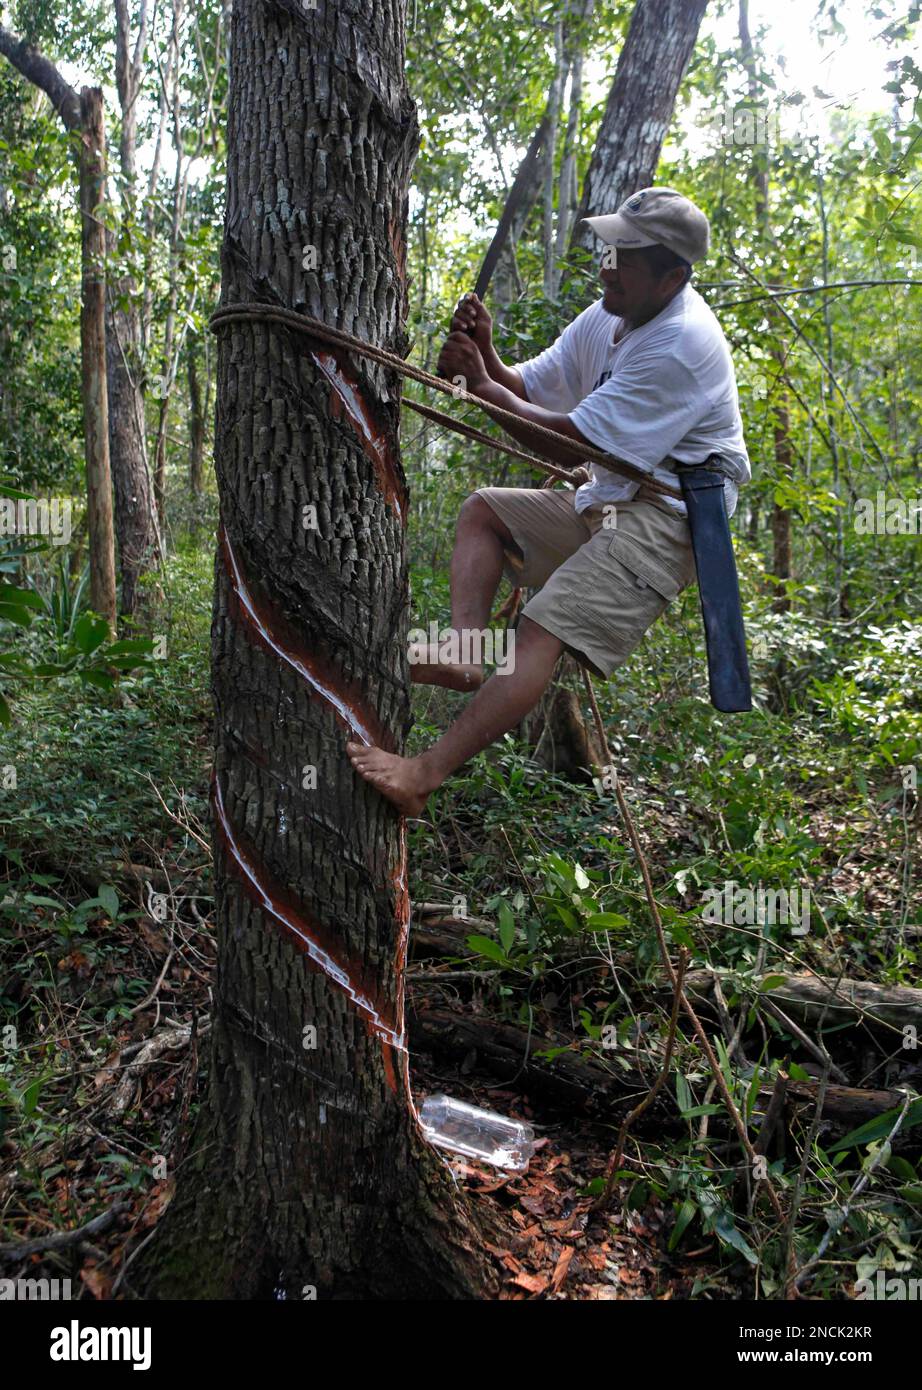 Mayan Indian Pedro Chuc May collects sap from a tree known as 'gum tree',  to produce handcrafted chewing gum in Betania, Mexico, Tuesday, Nov. 30,  2010. During the annual UN Climate Change